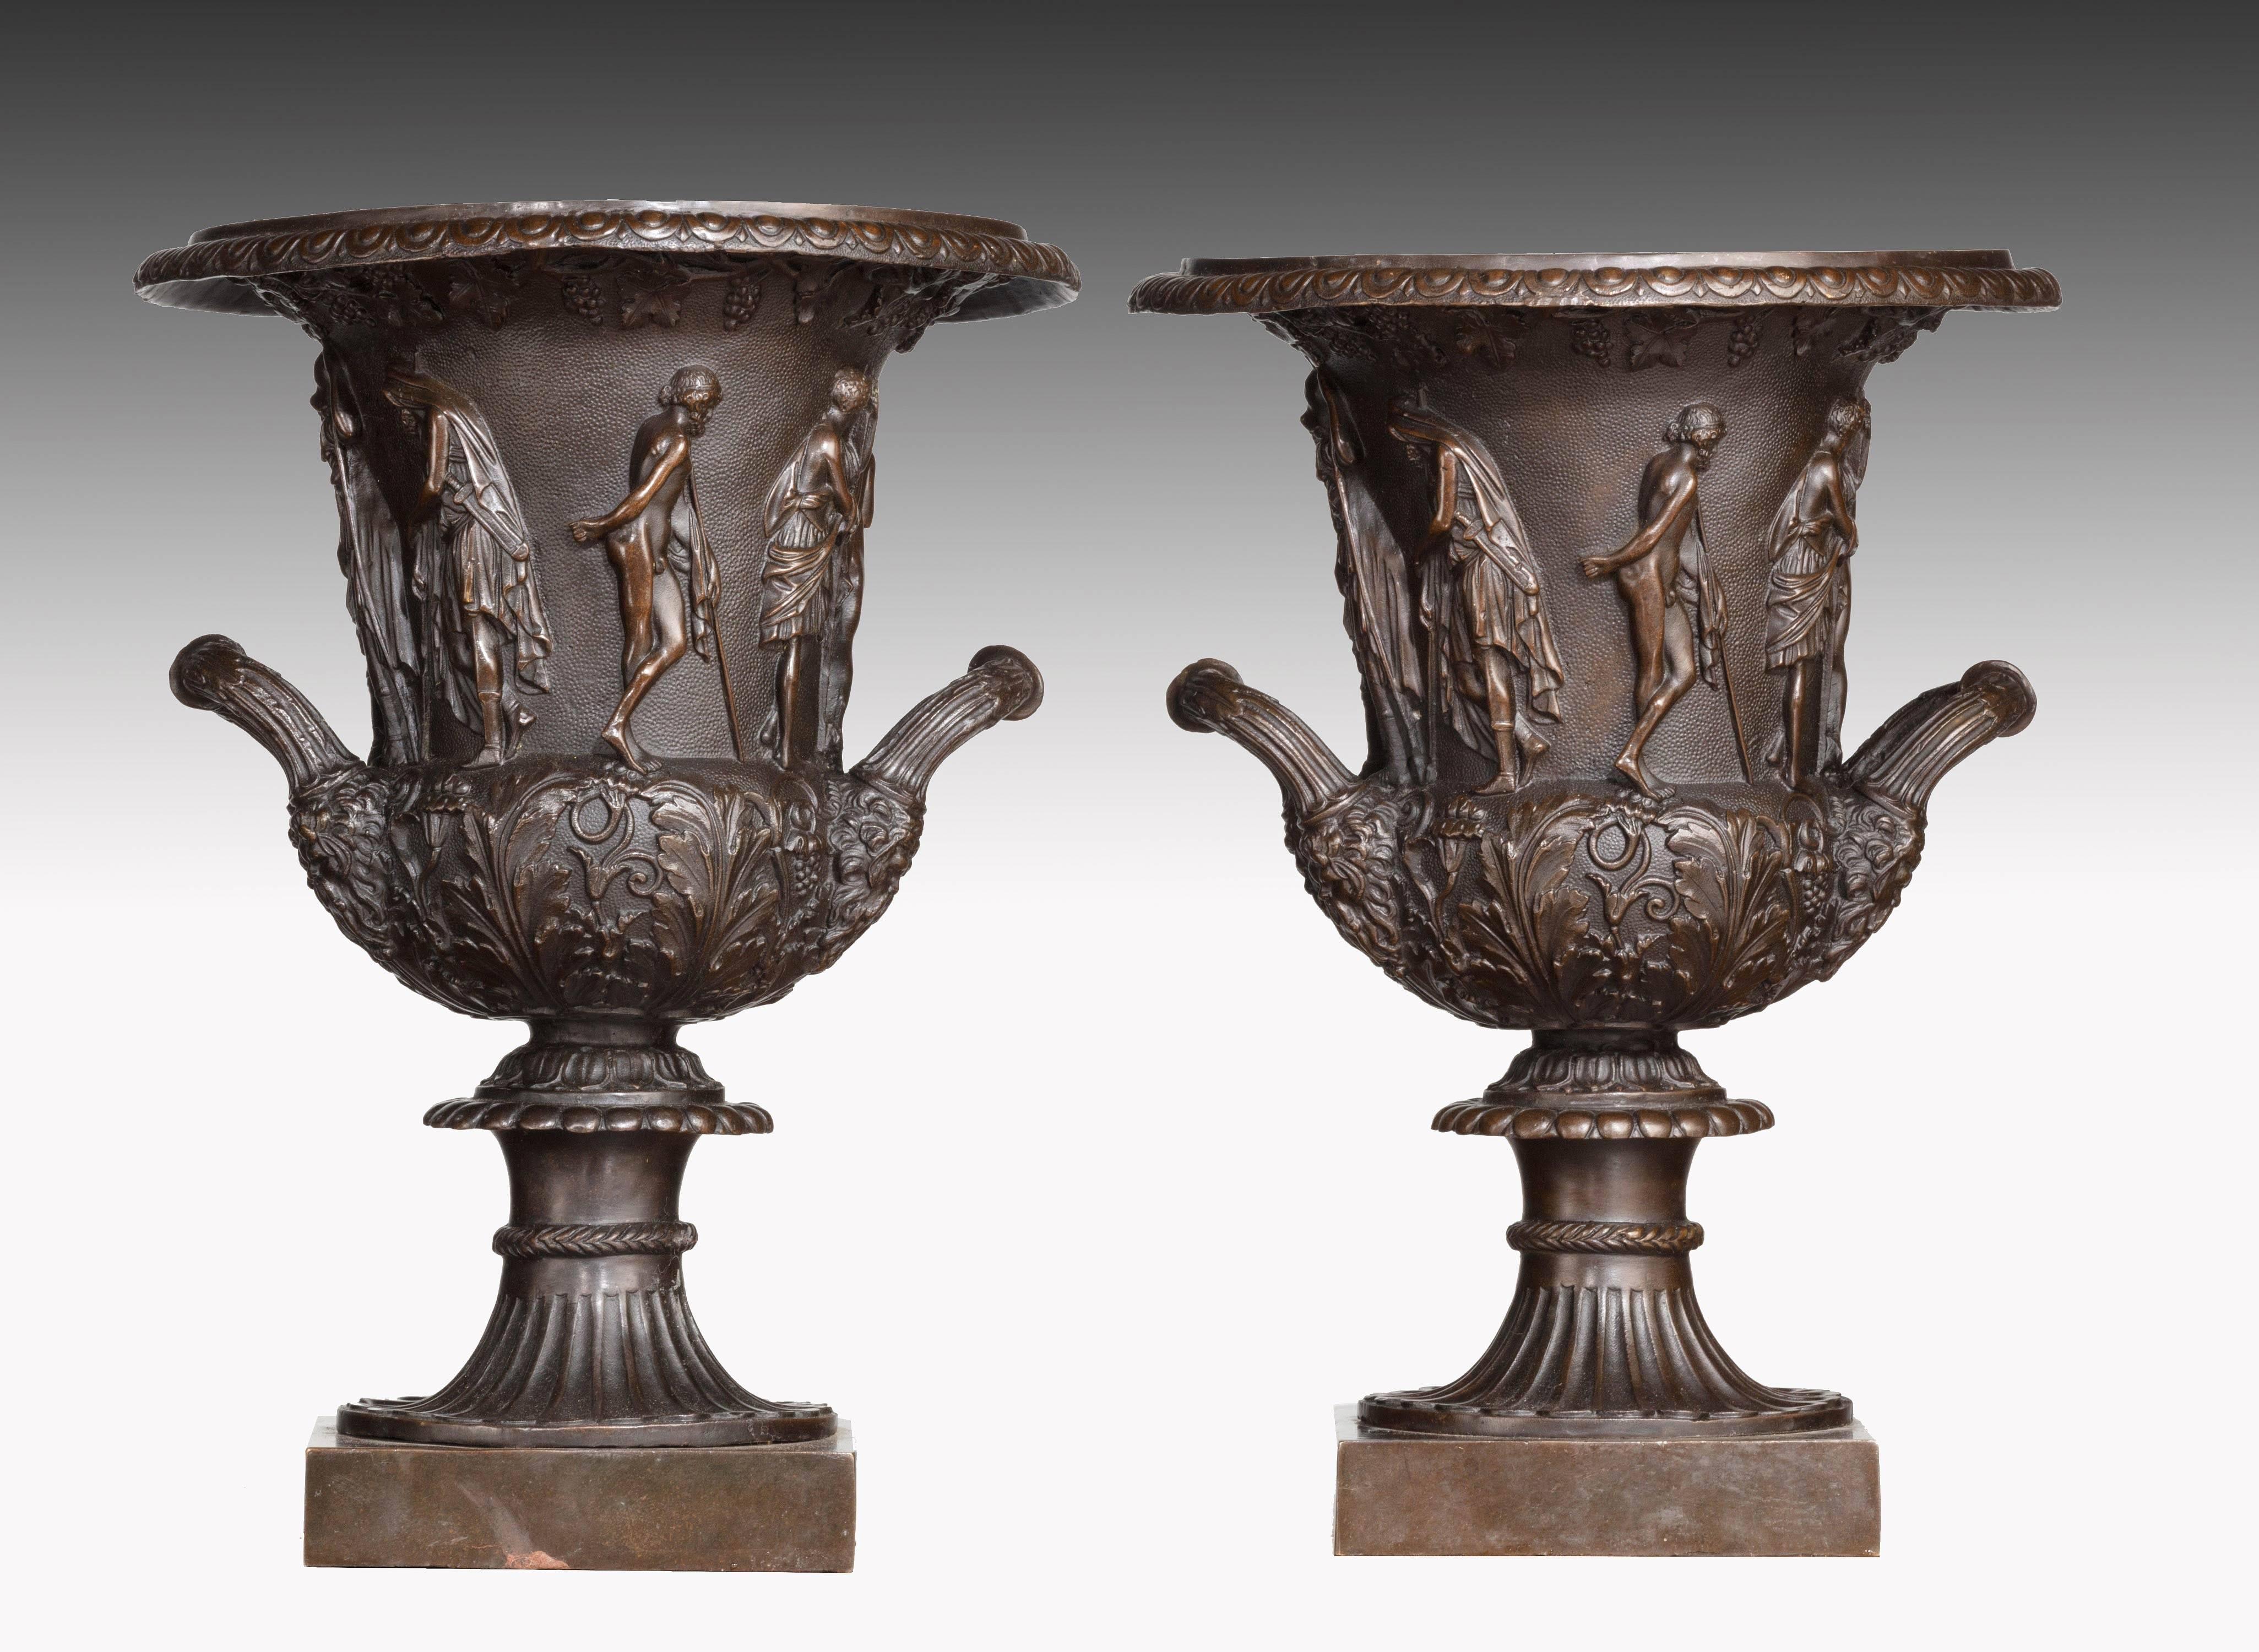 An unusually finely cast and chiselled pair of neoclassical bronze Campana shaped urns. With continuous decoration around the main body. Rich dark brown patina.